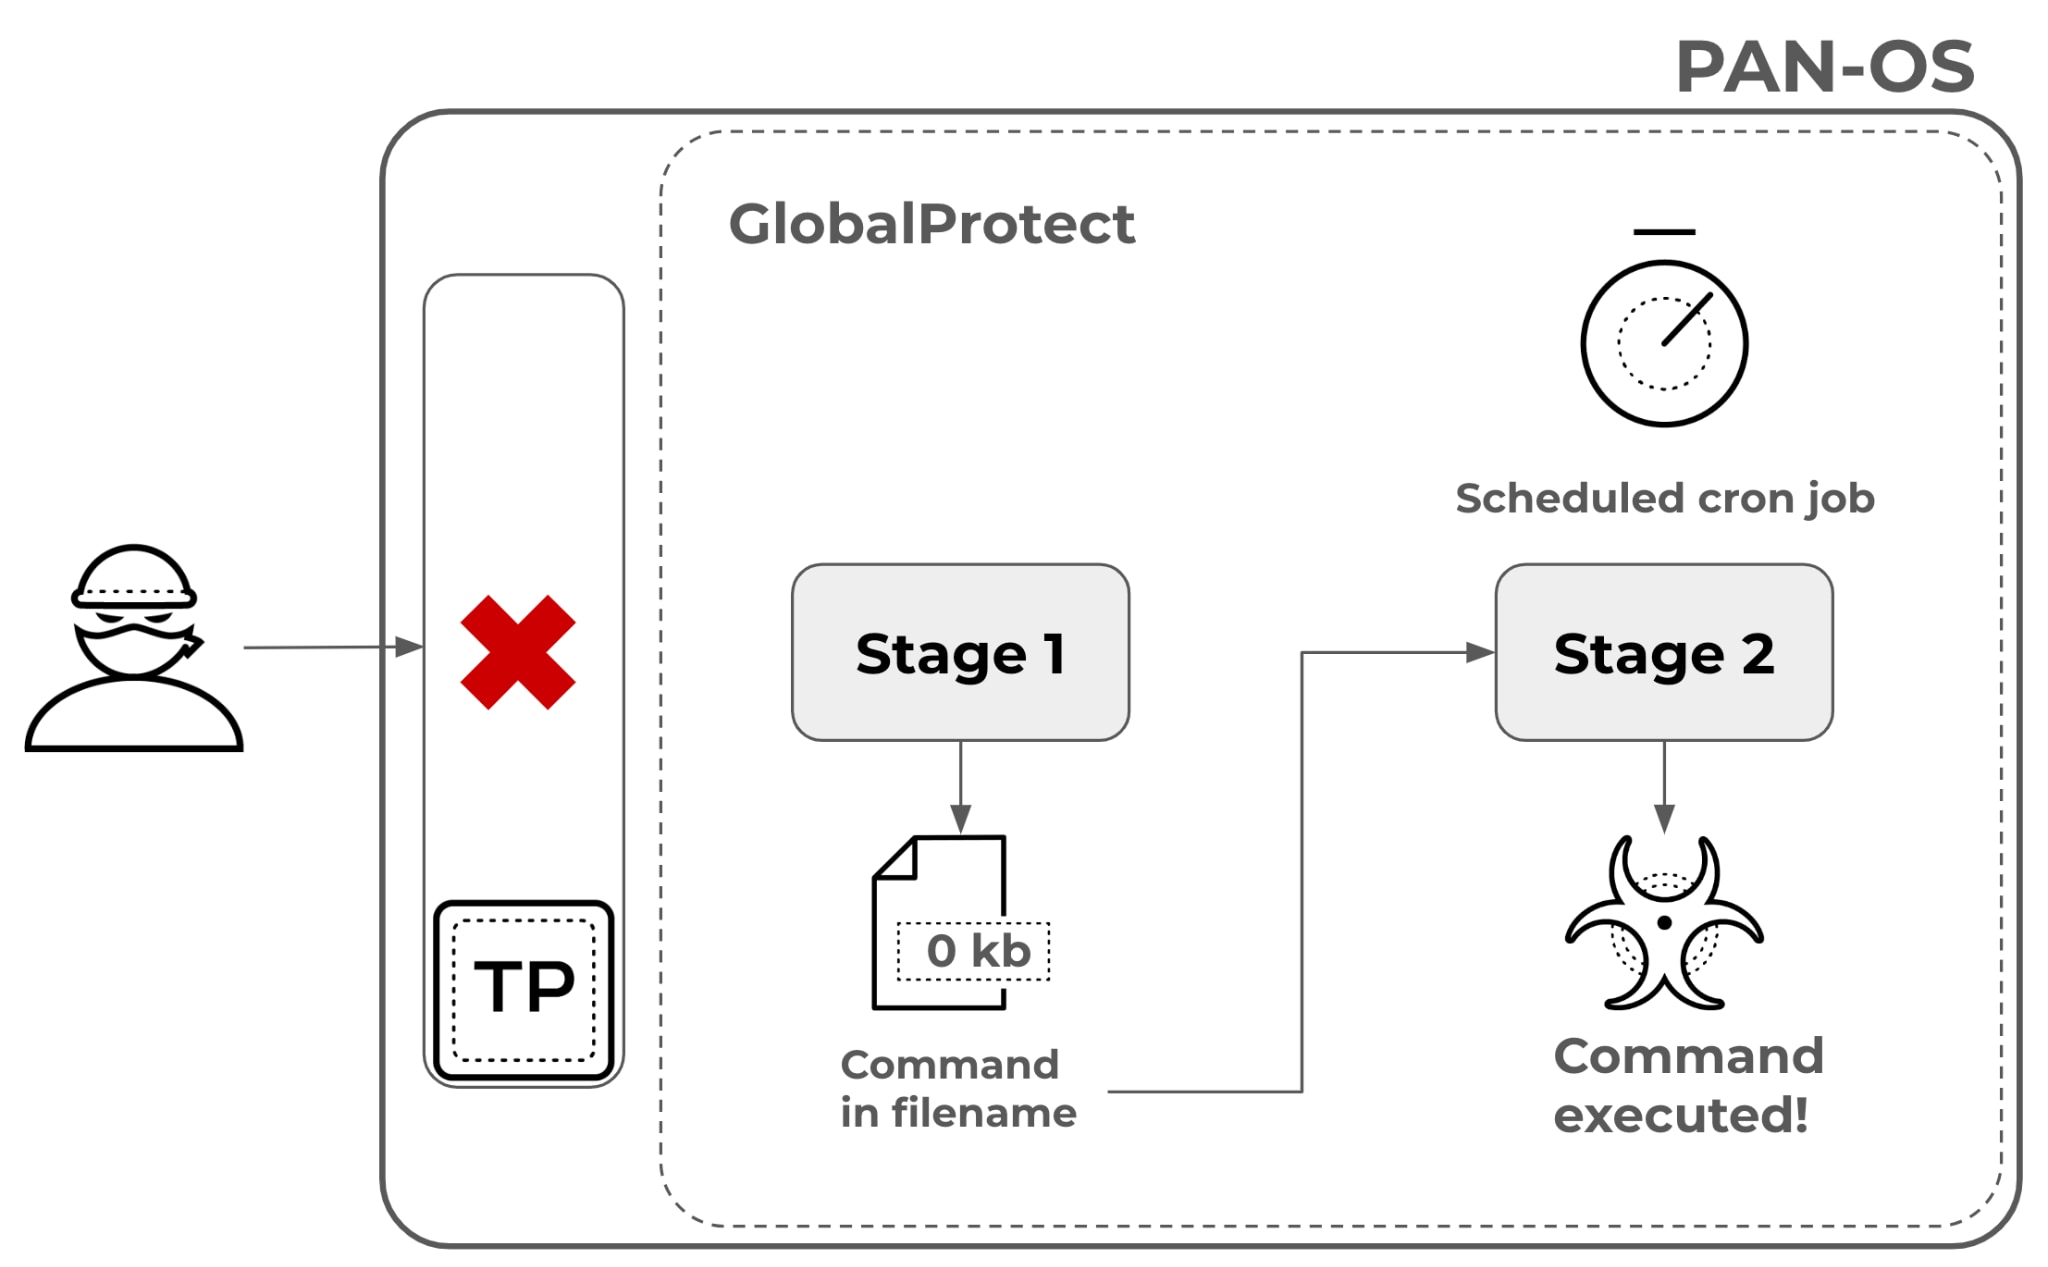 Graph of PAN-OS Global Protect, stage 1 and stage 2.